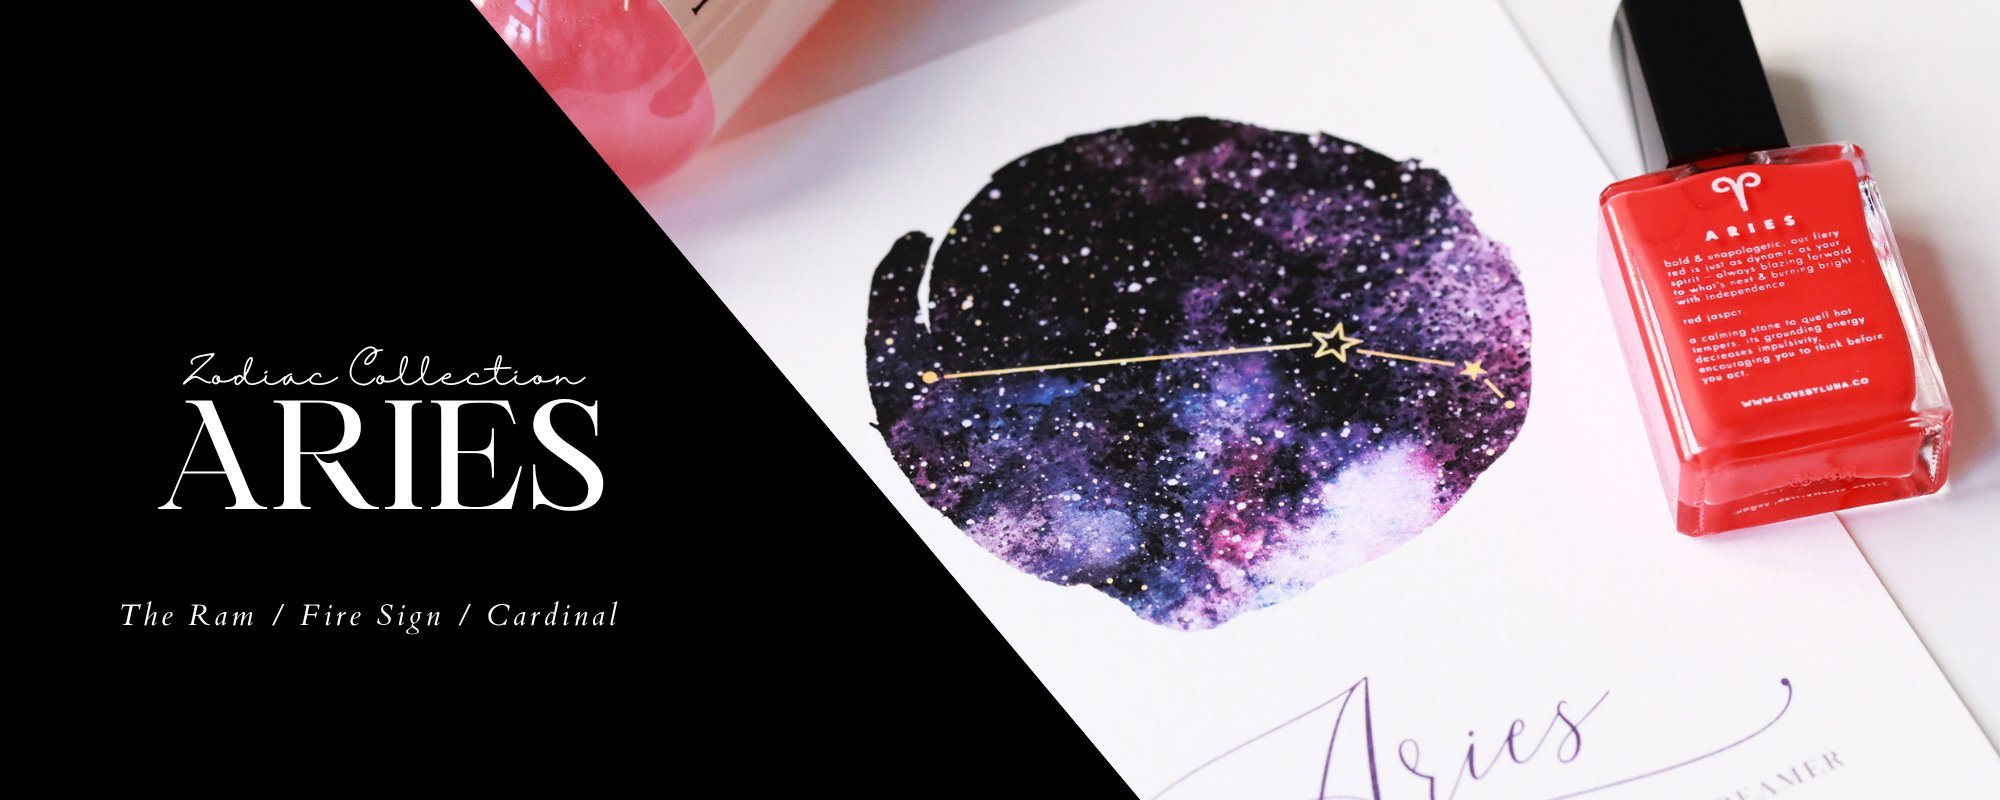 The aries zodiac sign gift collection image header